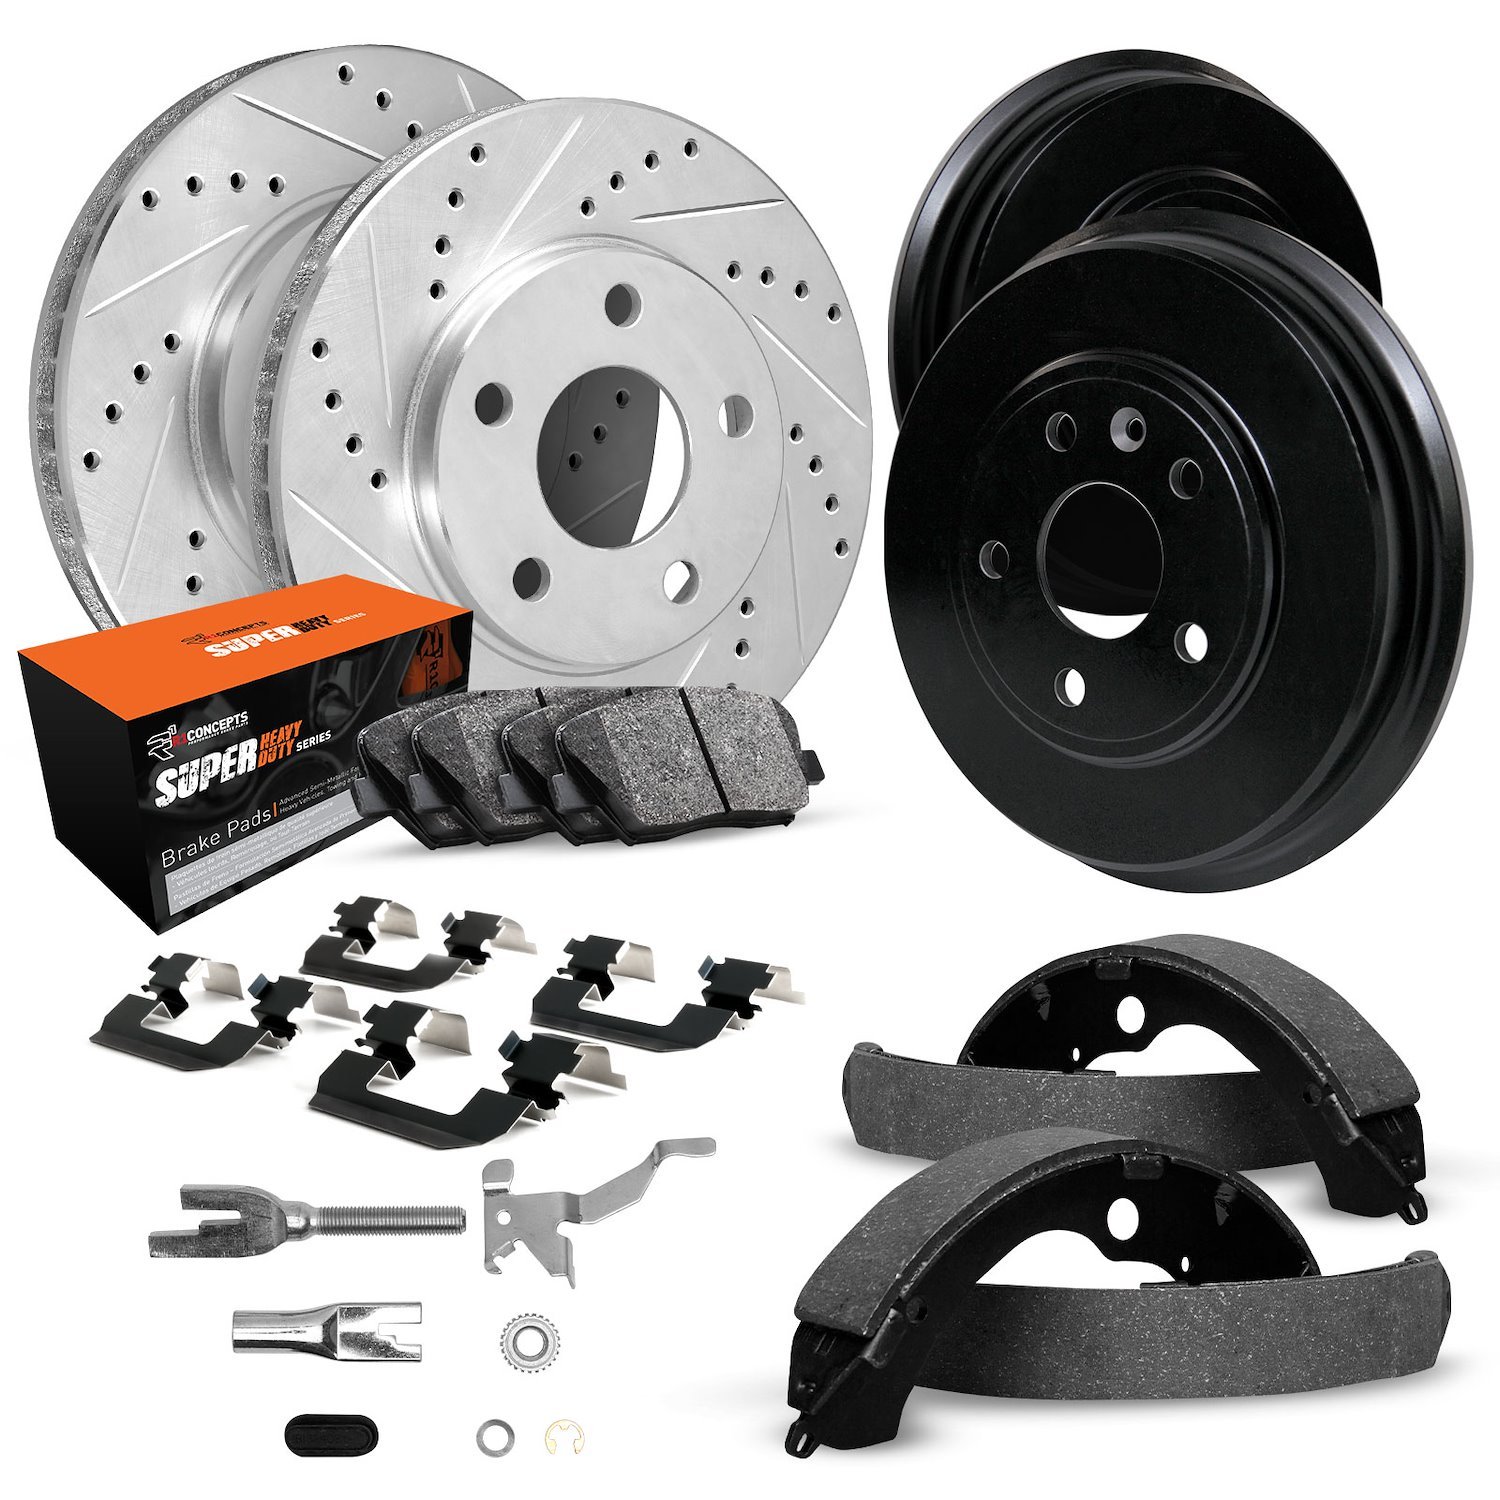 E-Line Drilled/Slotted Silver Rotor & Drum Set w/Super-Duty Pads, Shoes/Hardware/Adjusters, 1994-1999 Mopar